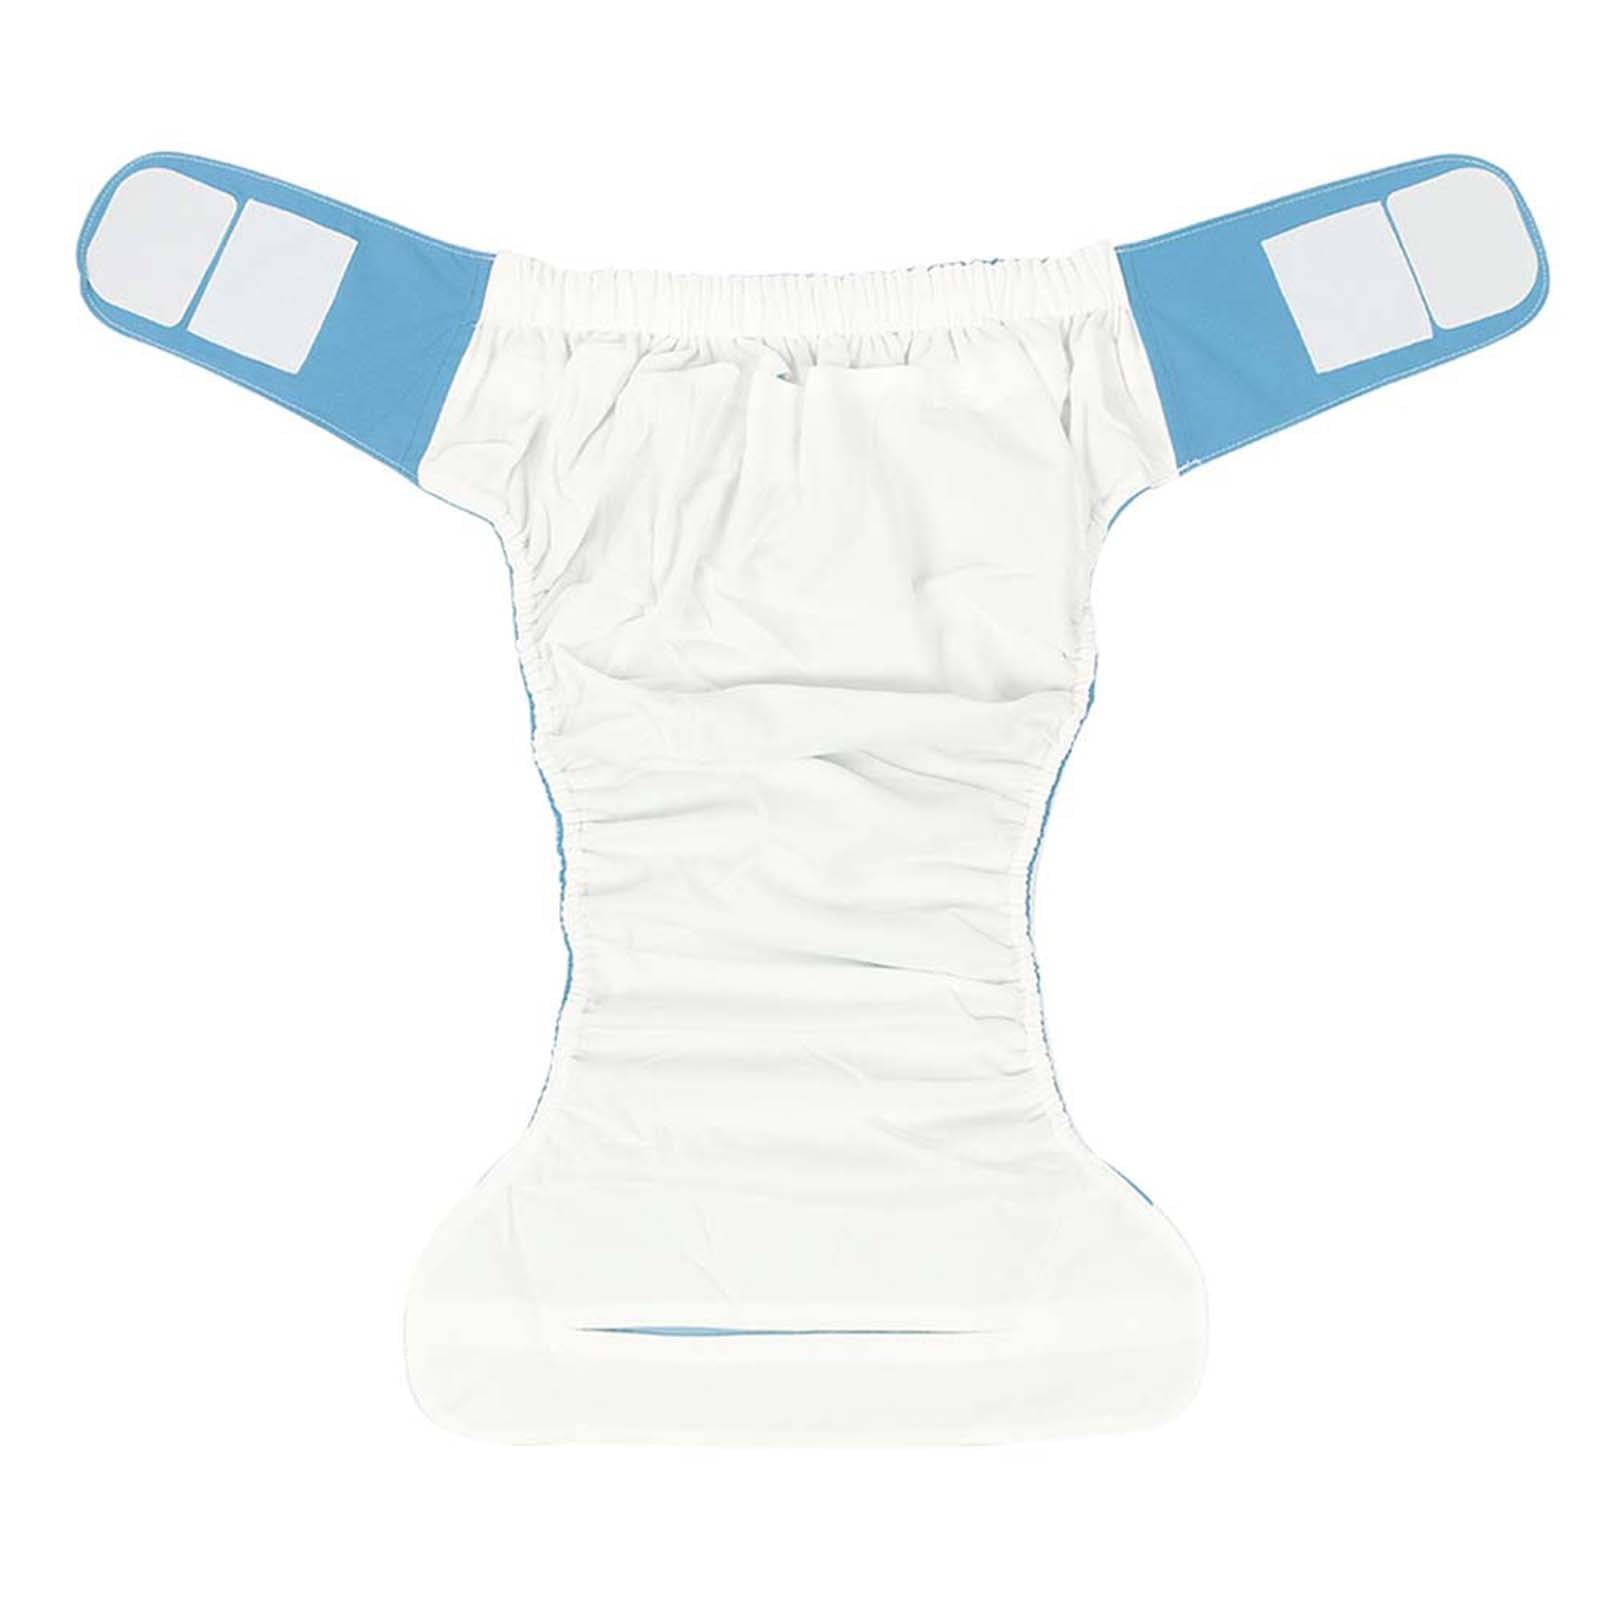 Diaper Cloth Adult Diapers Reusable Incontinence Elderly Adultswashable  Pants Nappy Pocketmen Insert Postpartum Nighttime Briefs